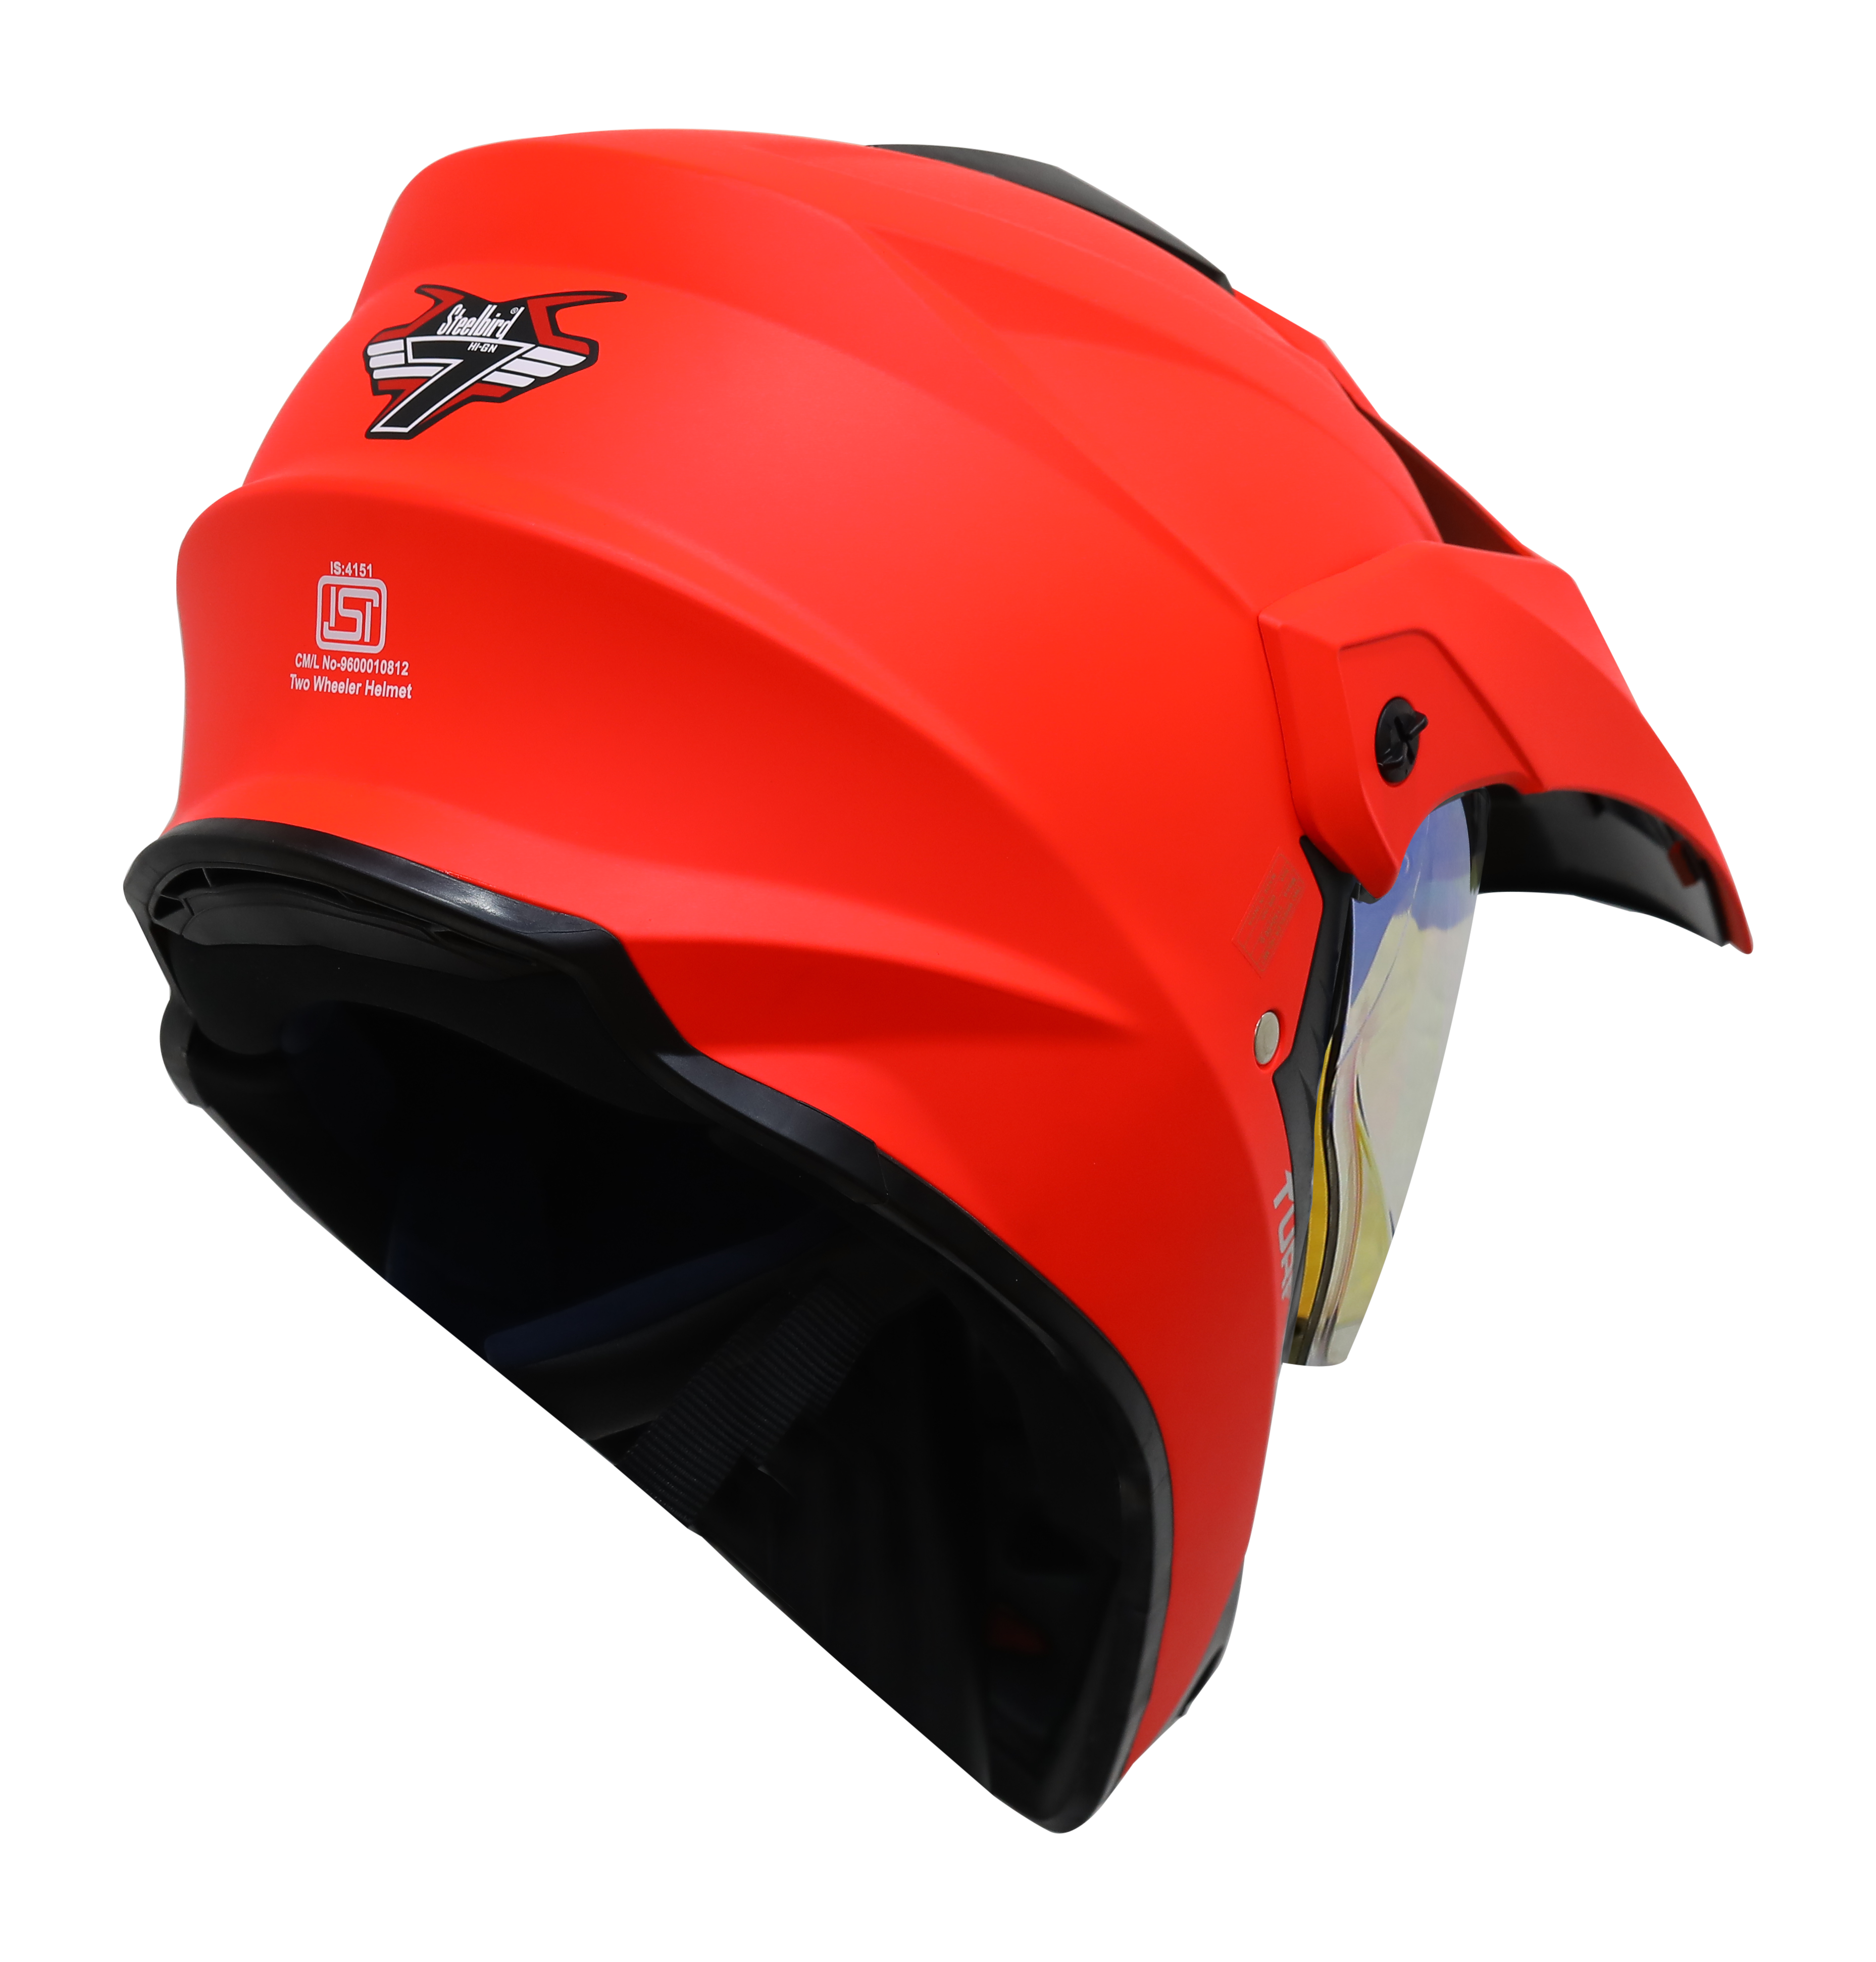 SB-42 Turf Single Visor Glossy Fluo Red With Gold Night Vision Visor (With Extra Clear Visor)